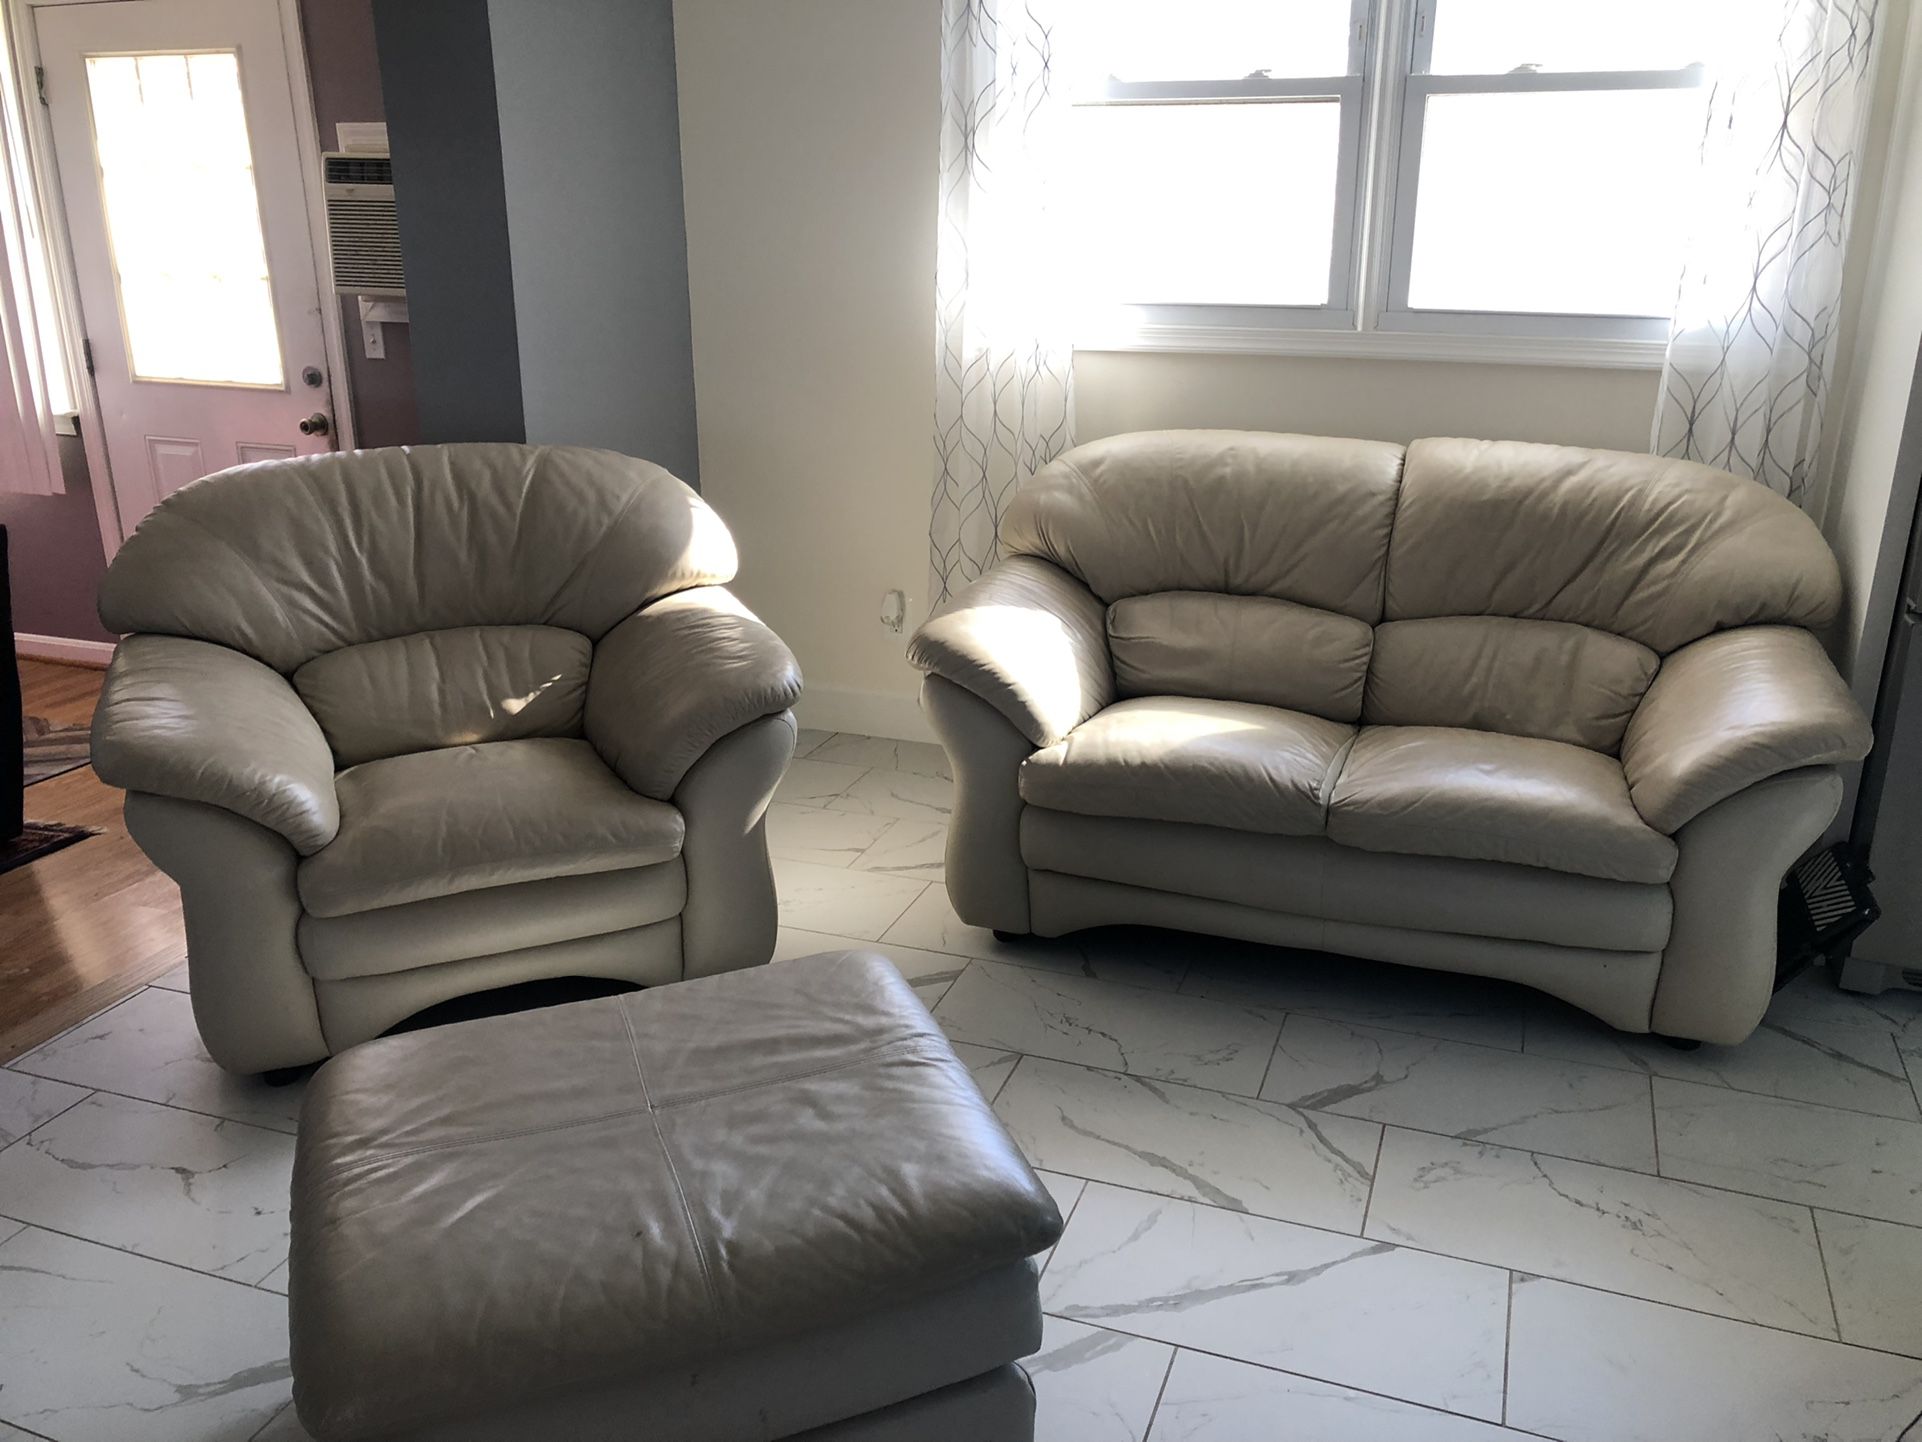 3 Piece Leather Furniture  Loveseat And Chair With Rest